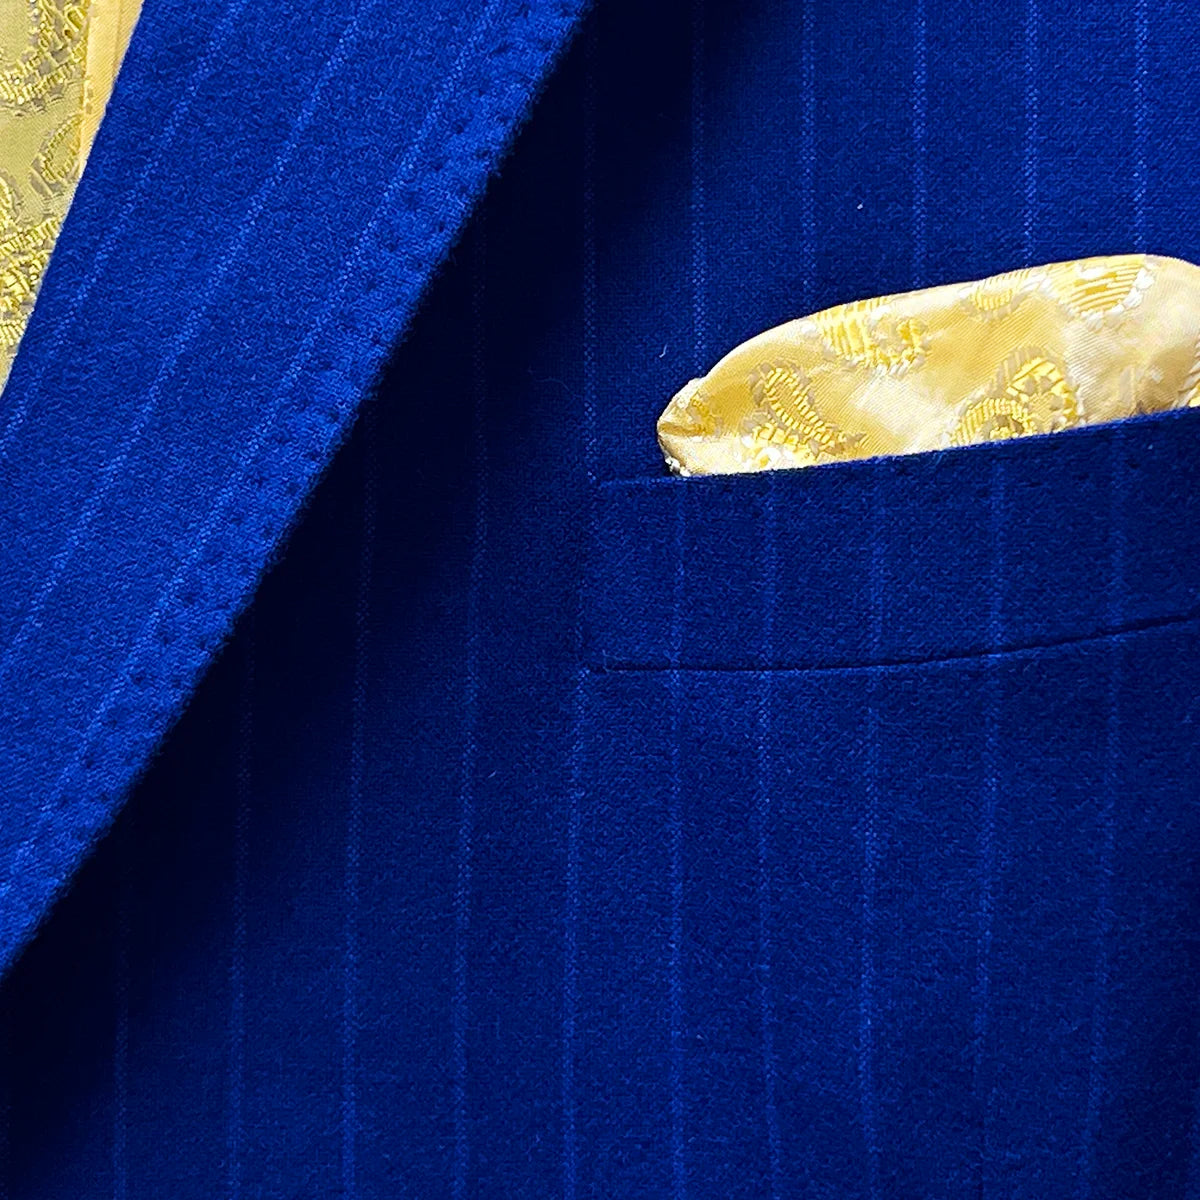 Pocket square option for the royal blue pinstripe suit.